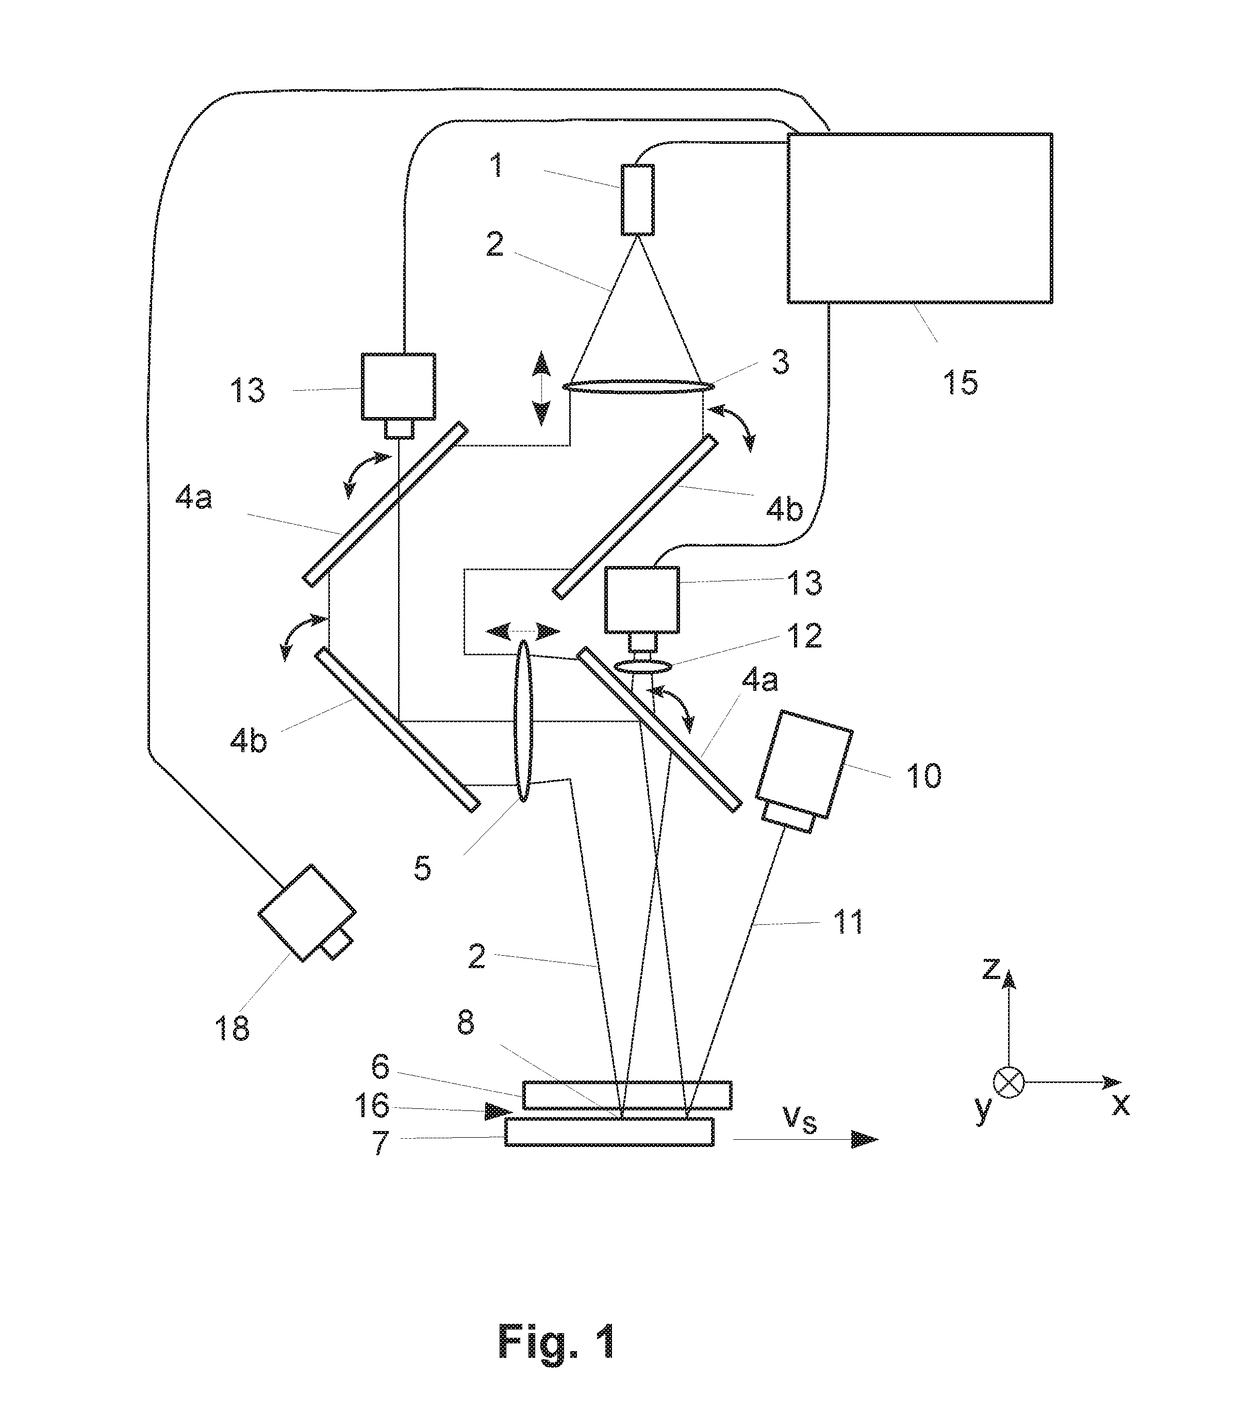 Method and Apparatus for Joining Workpieces at a Lap Joint